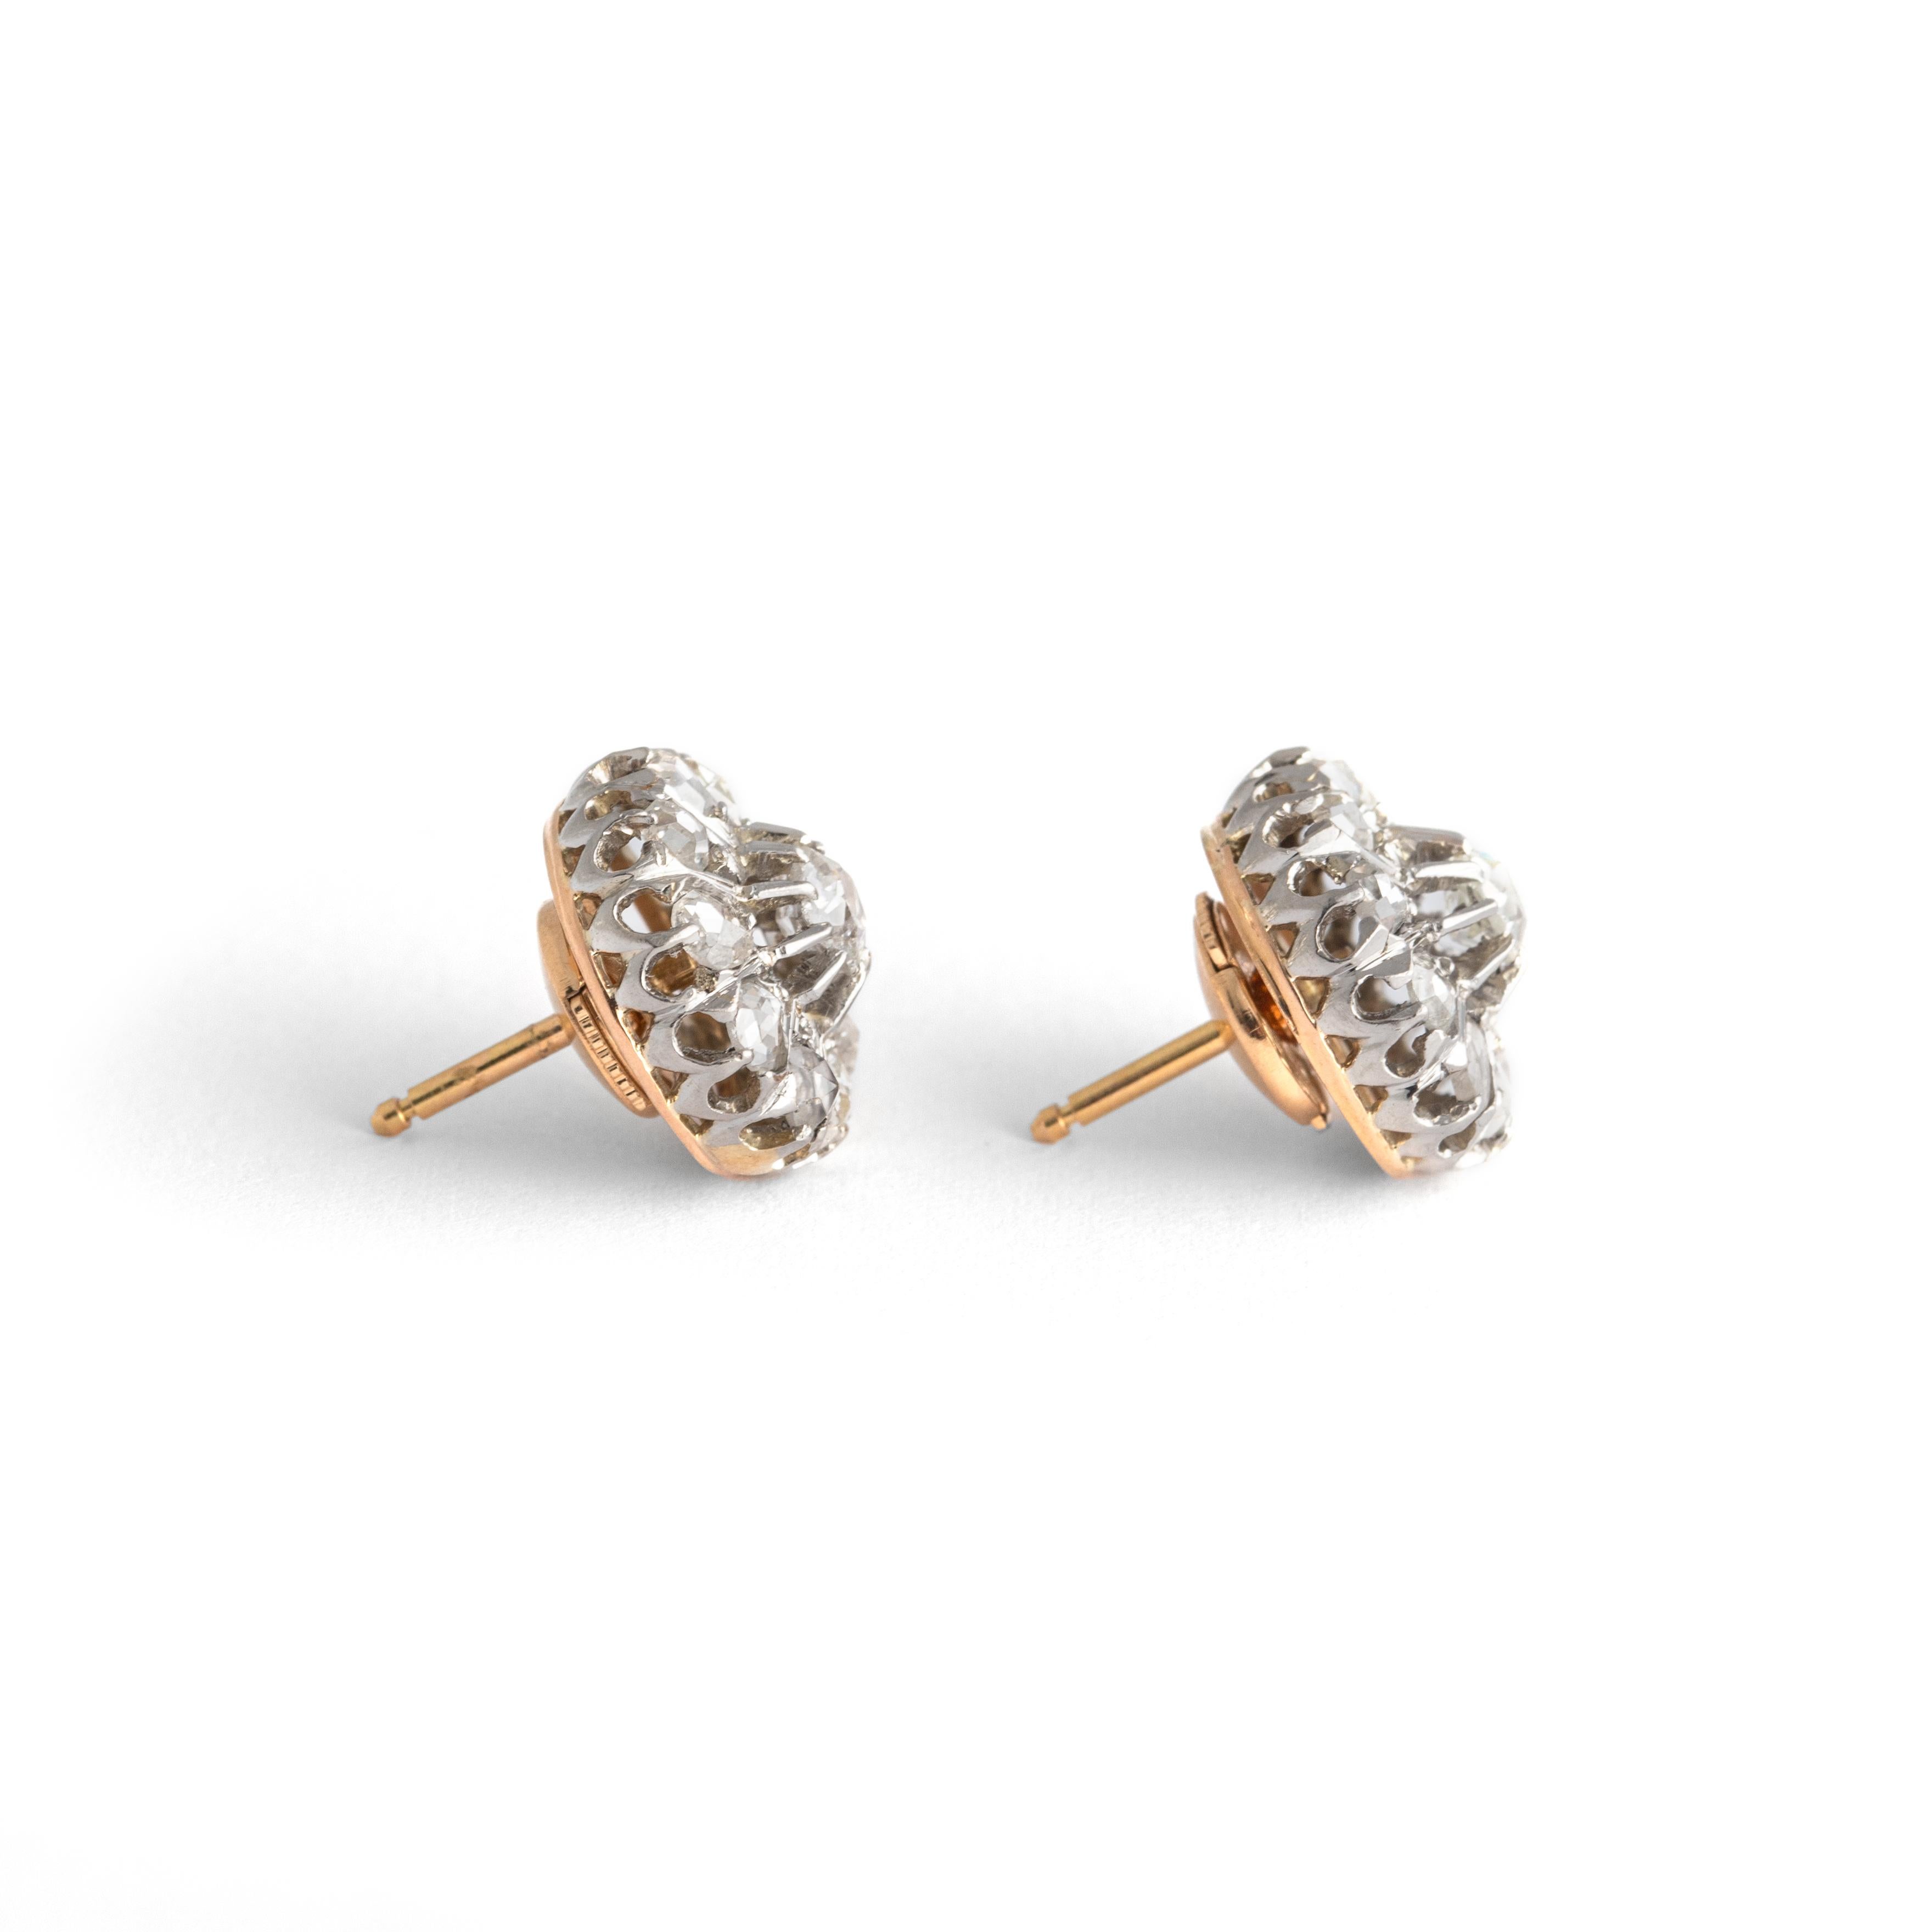 Antique Diamond Studs Earrings.
Old mine and Rose cut diamond on gold.
Dimensions: approx. 1.20 x 1.20 centimeters.
Early 20th Century.
Total gross weight: 6.29 grams.
